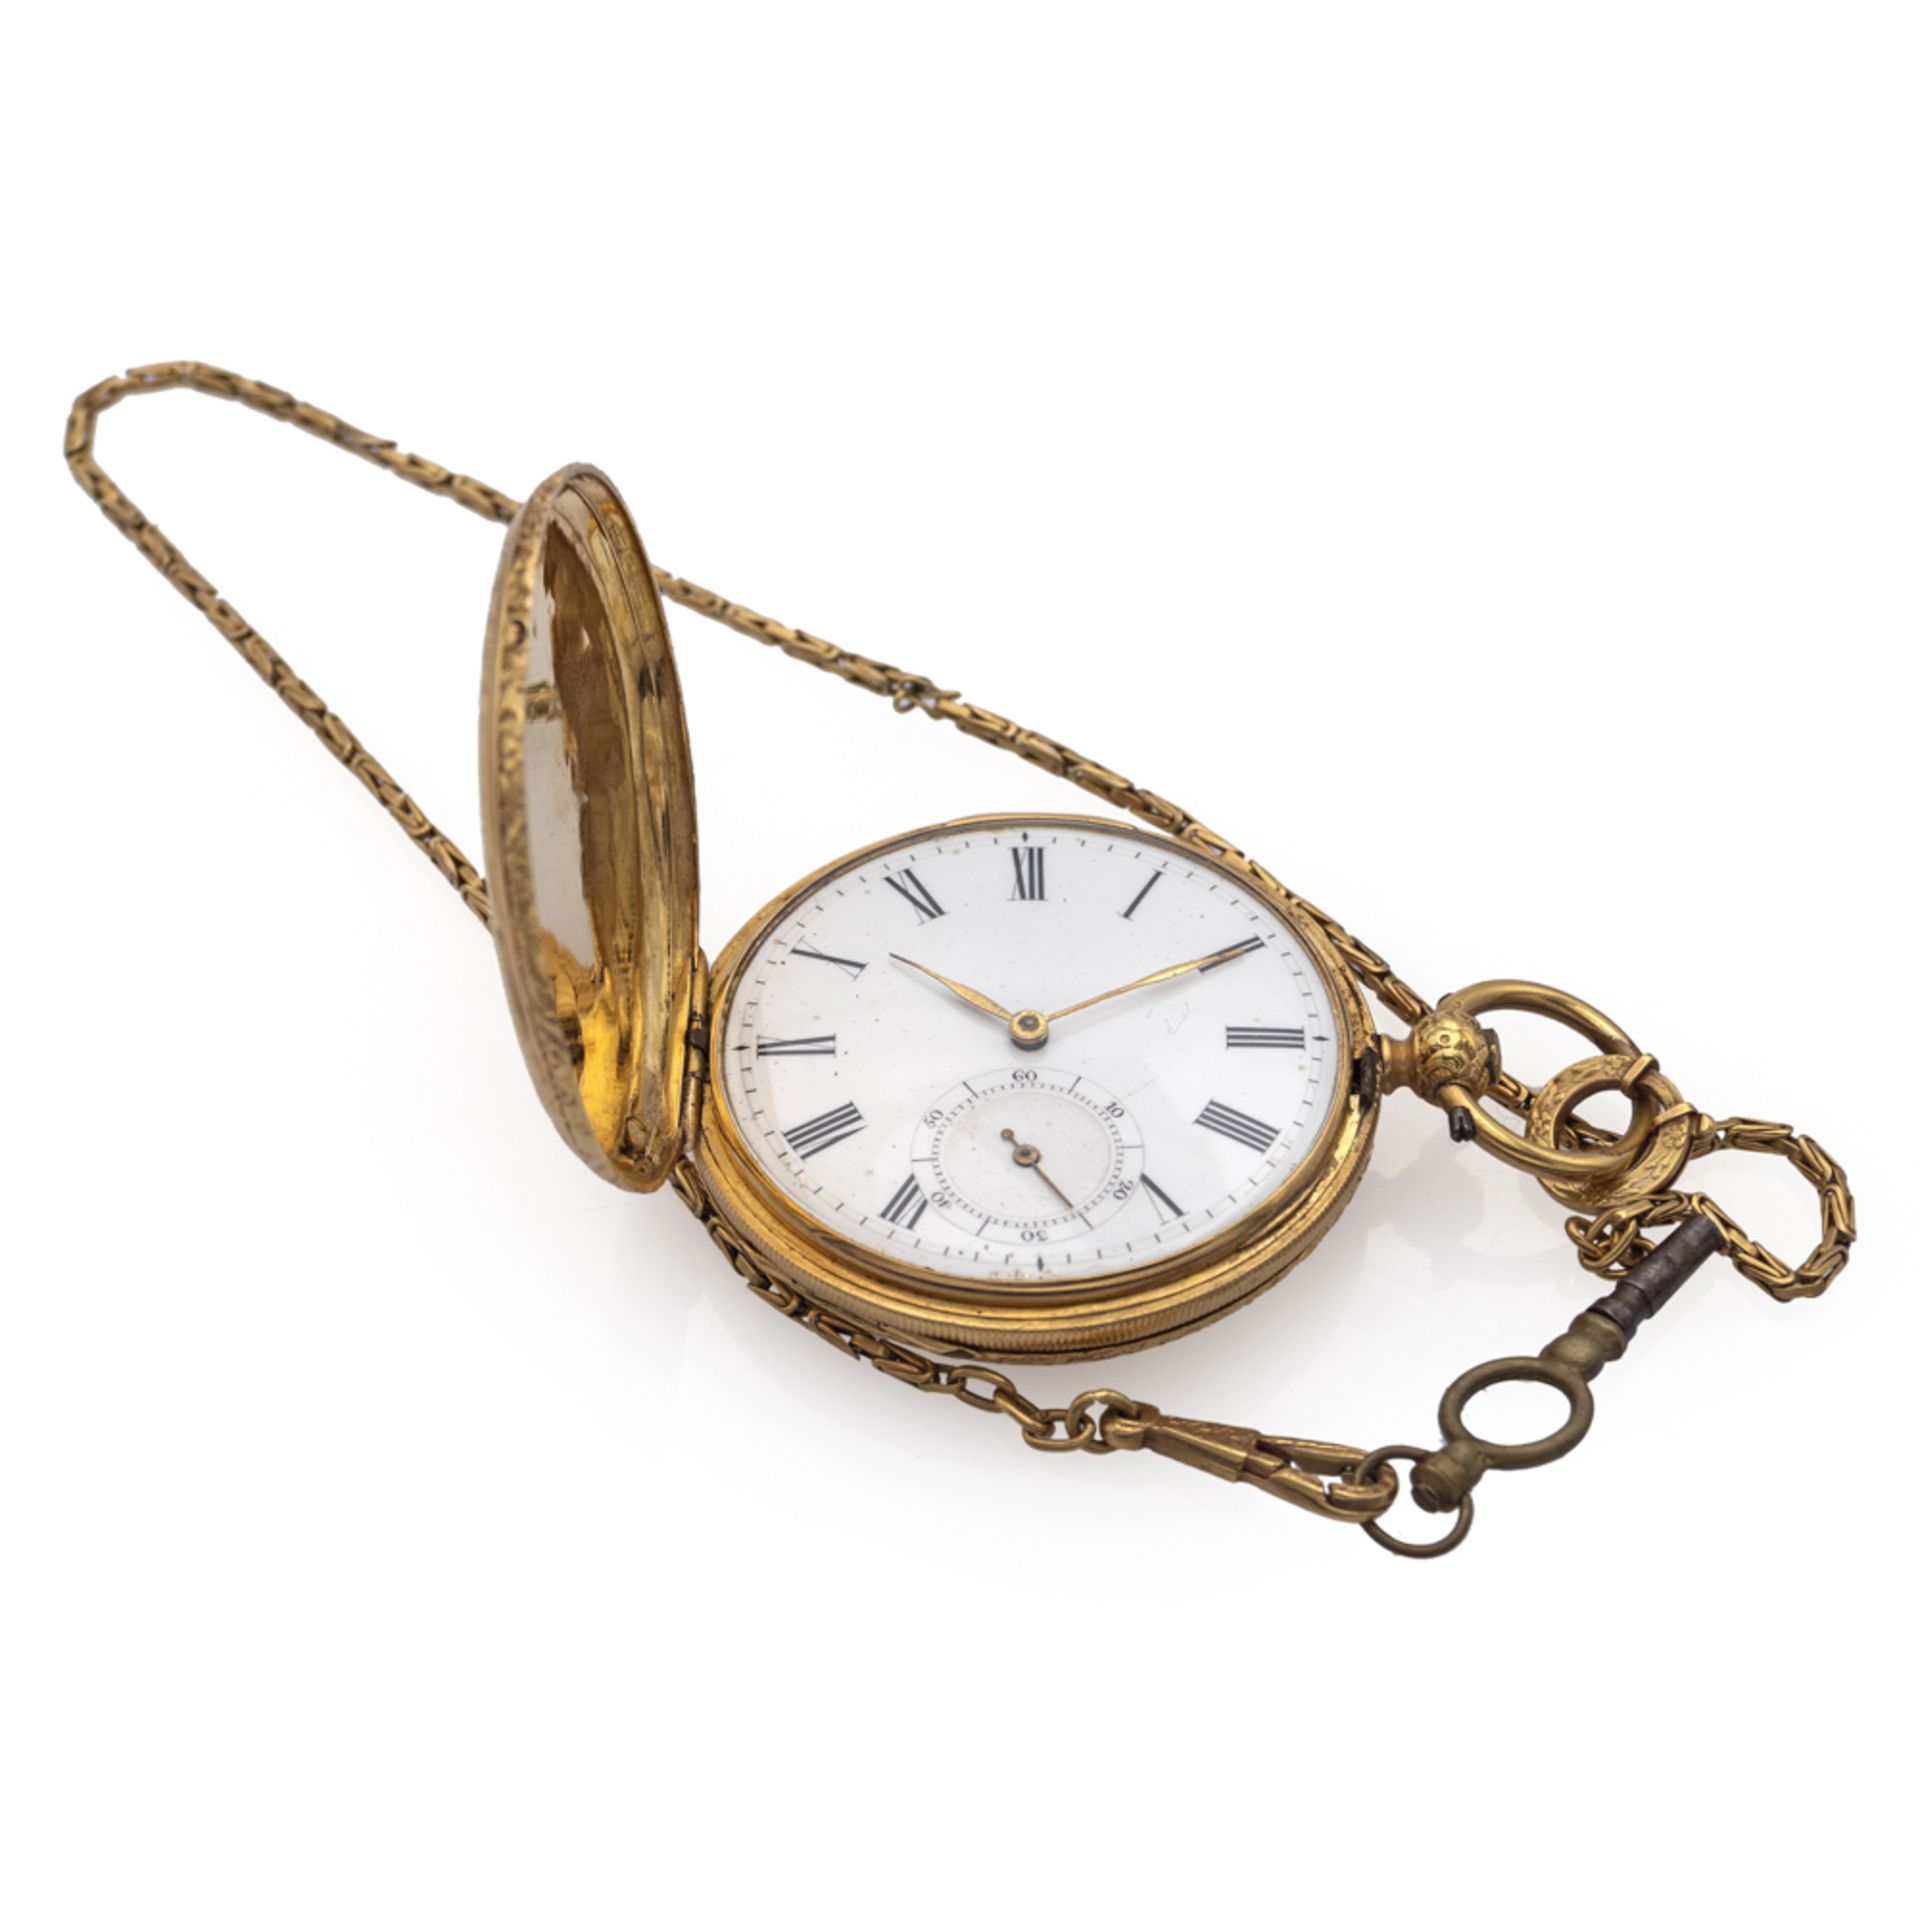 Aiguille, savonette pocket watch with chain and key